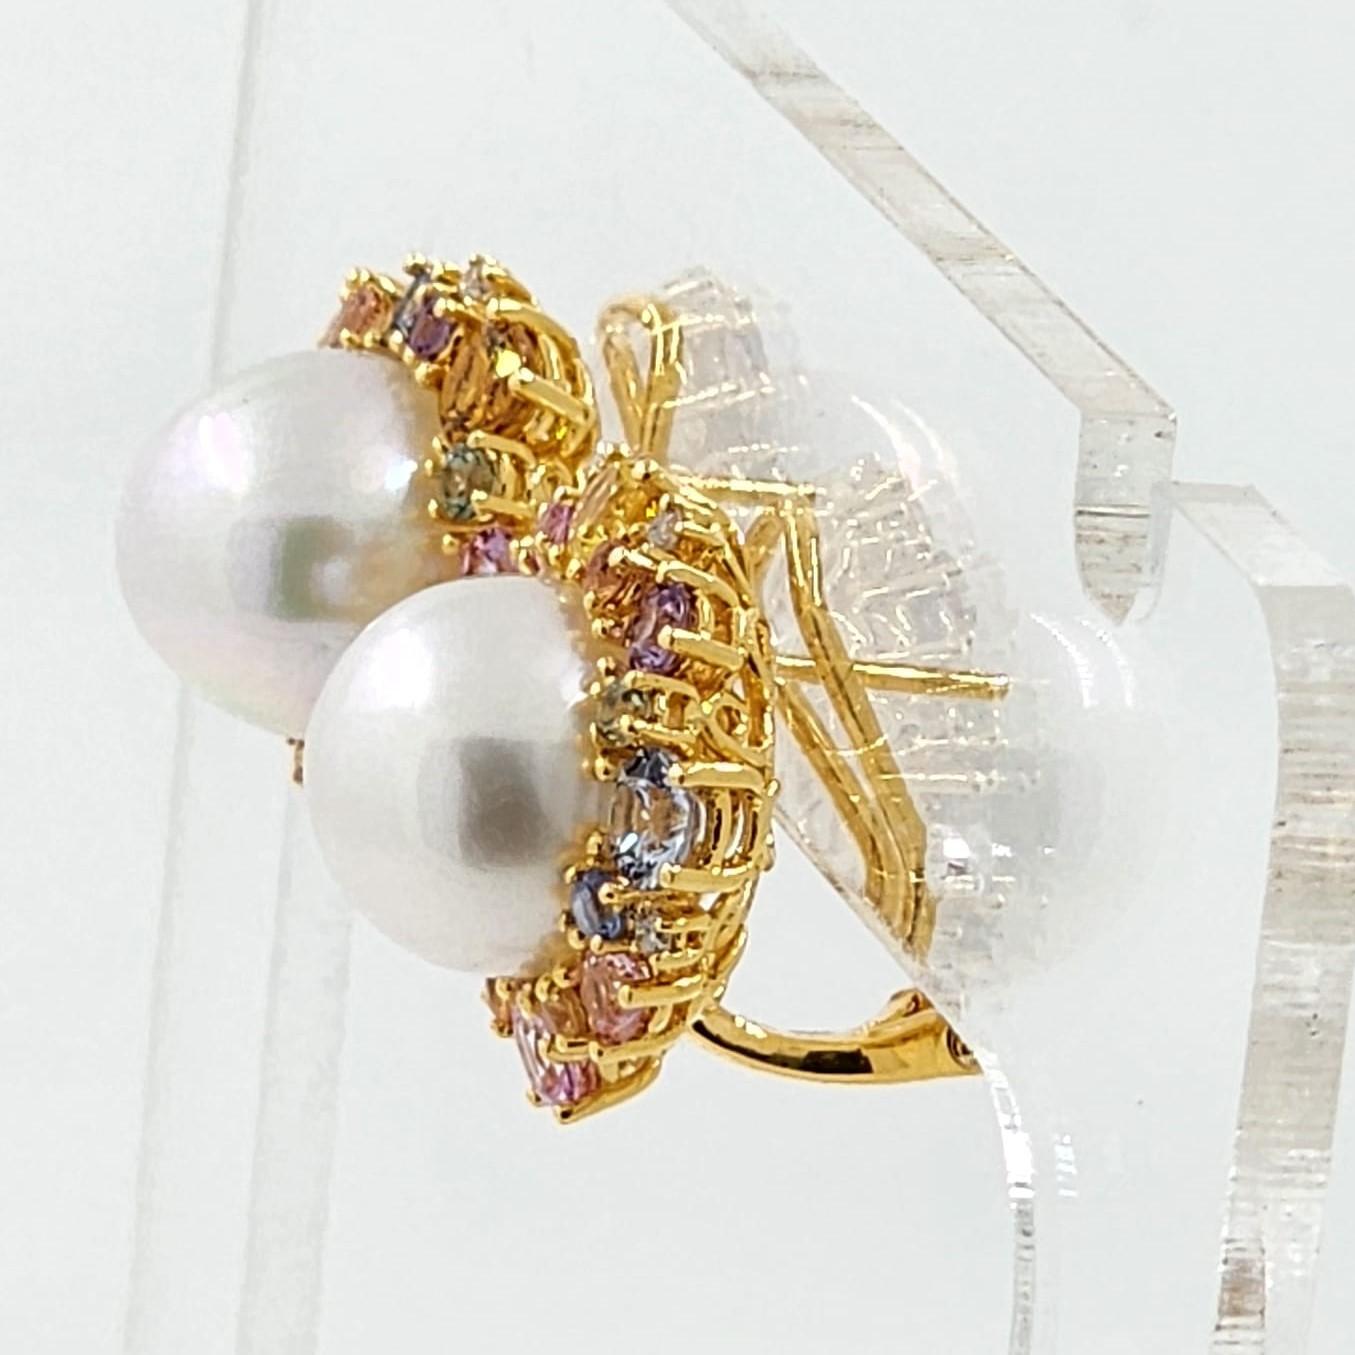 Contemporary 11mm South Sea Pearl and Fancy Sapphire in 18K Gold Vermeil Sterling Silver